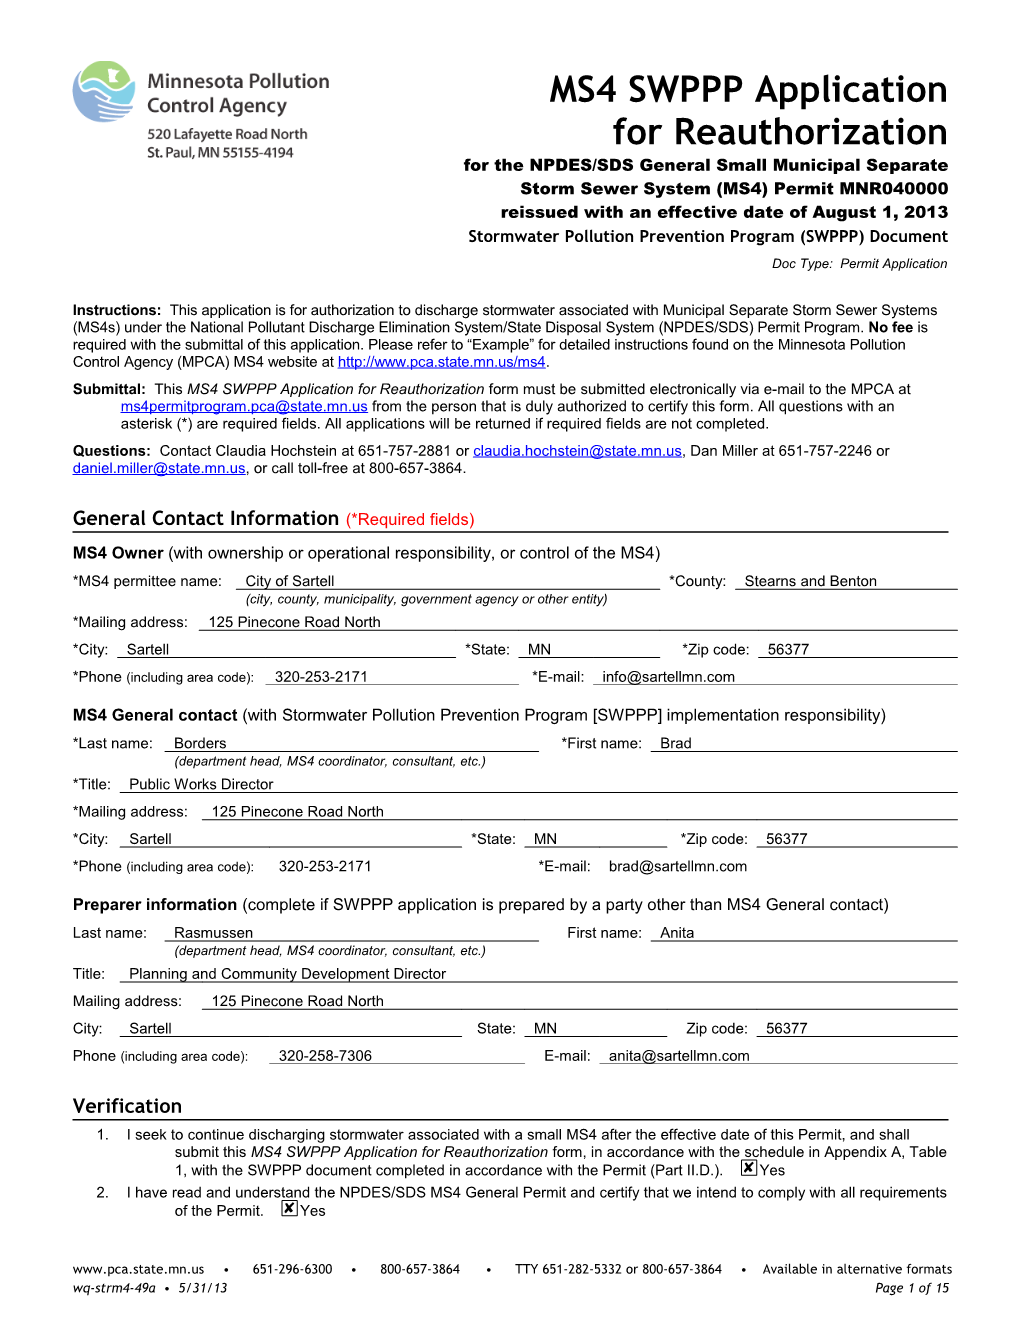 MS4 SWPPP Application for Reauthorization - Form